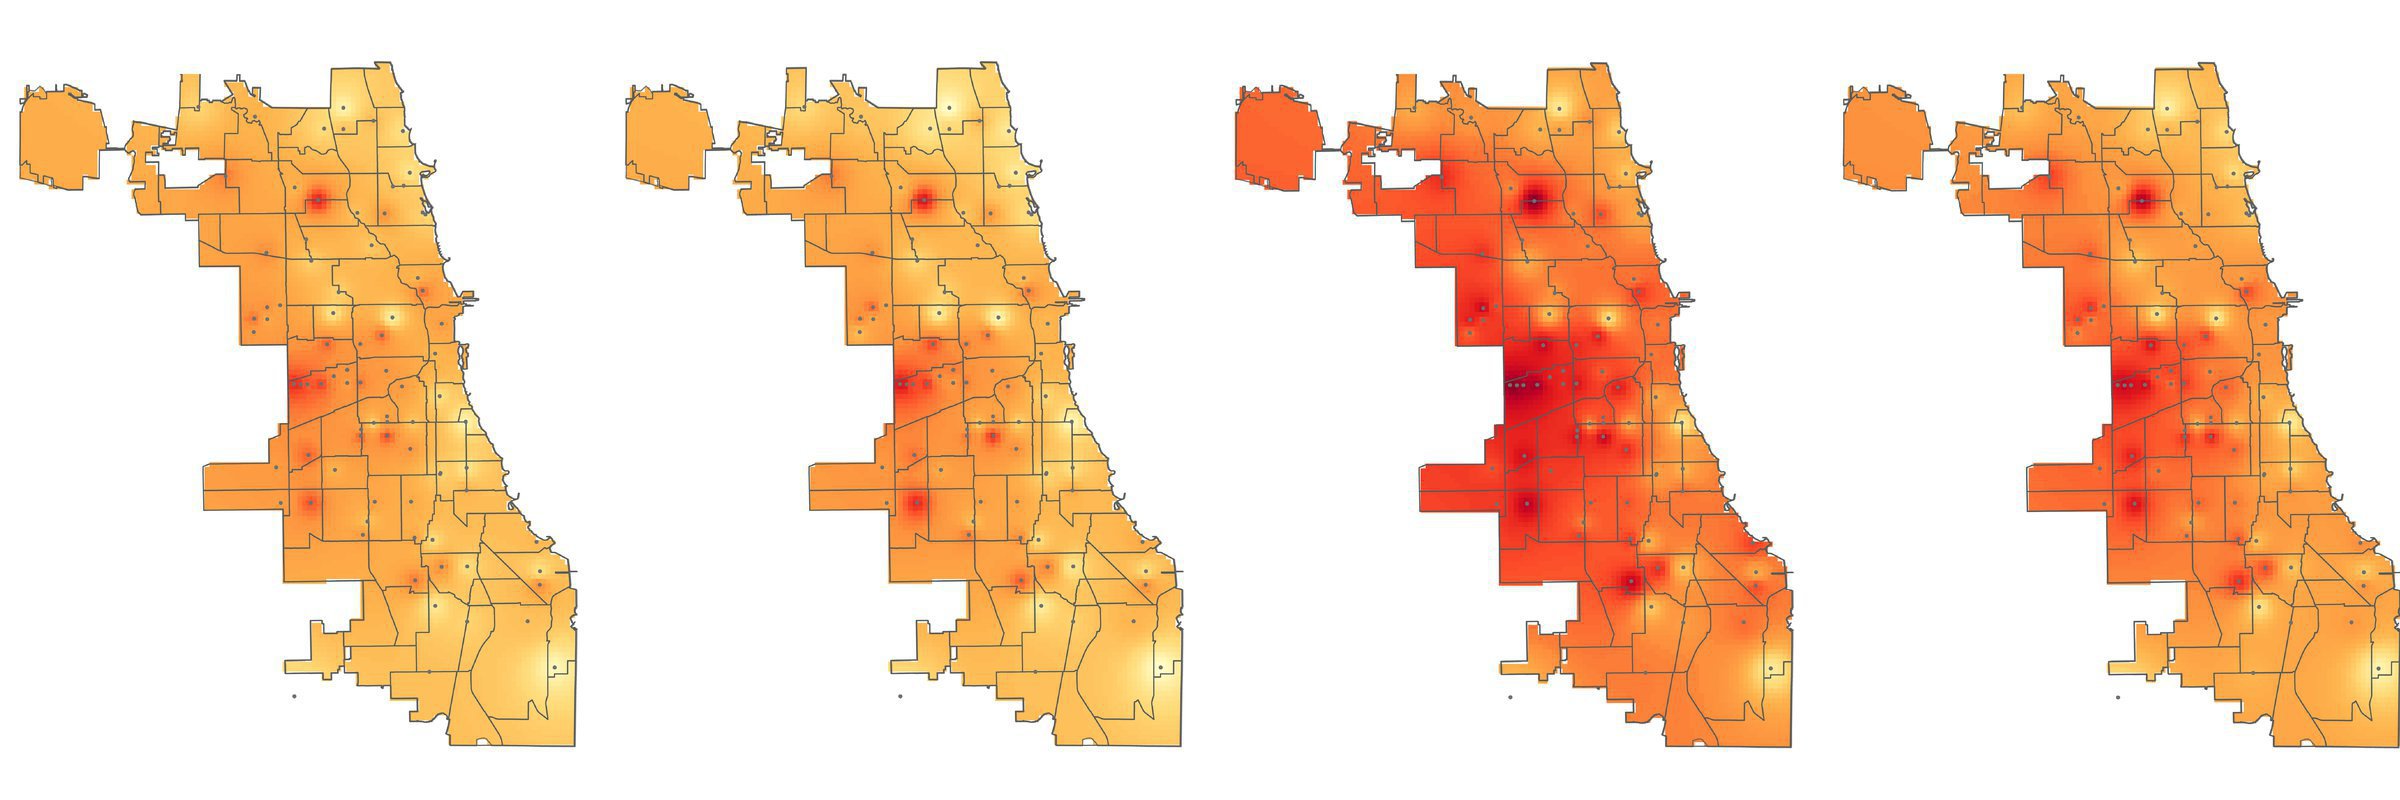 Microsoft abandons project mapping Chicago’s air pollution